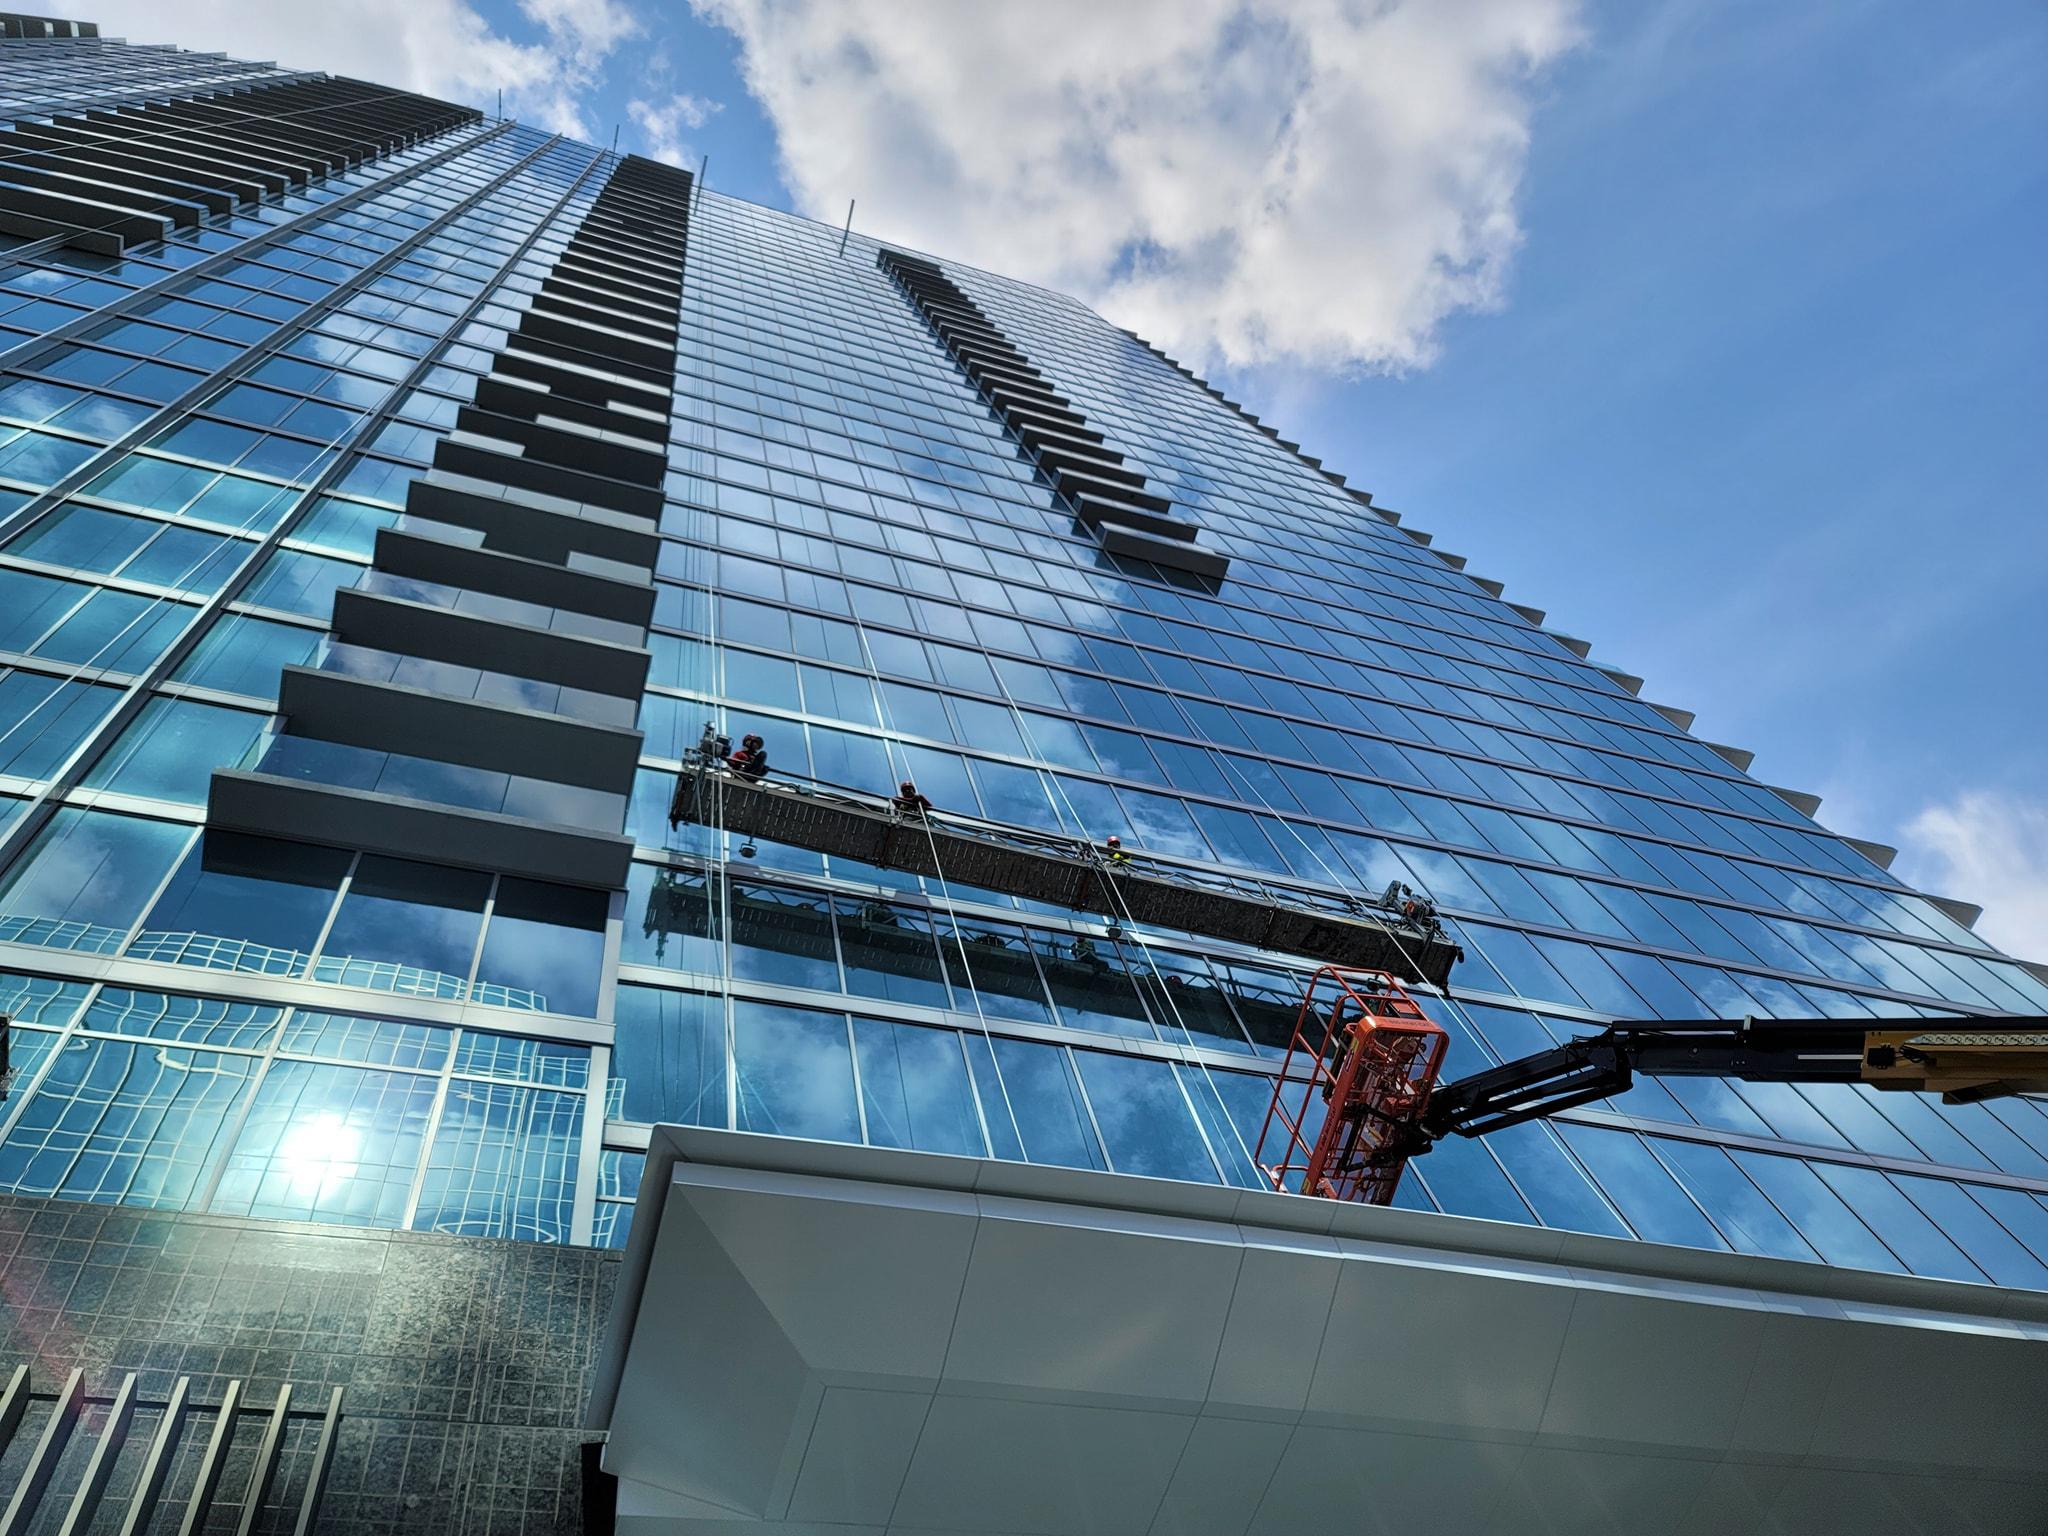 Window Cleaning for Sunlight Building Services in Birmingham, AL